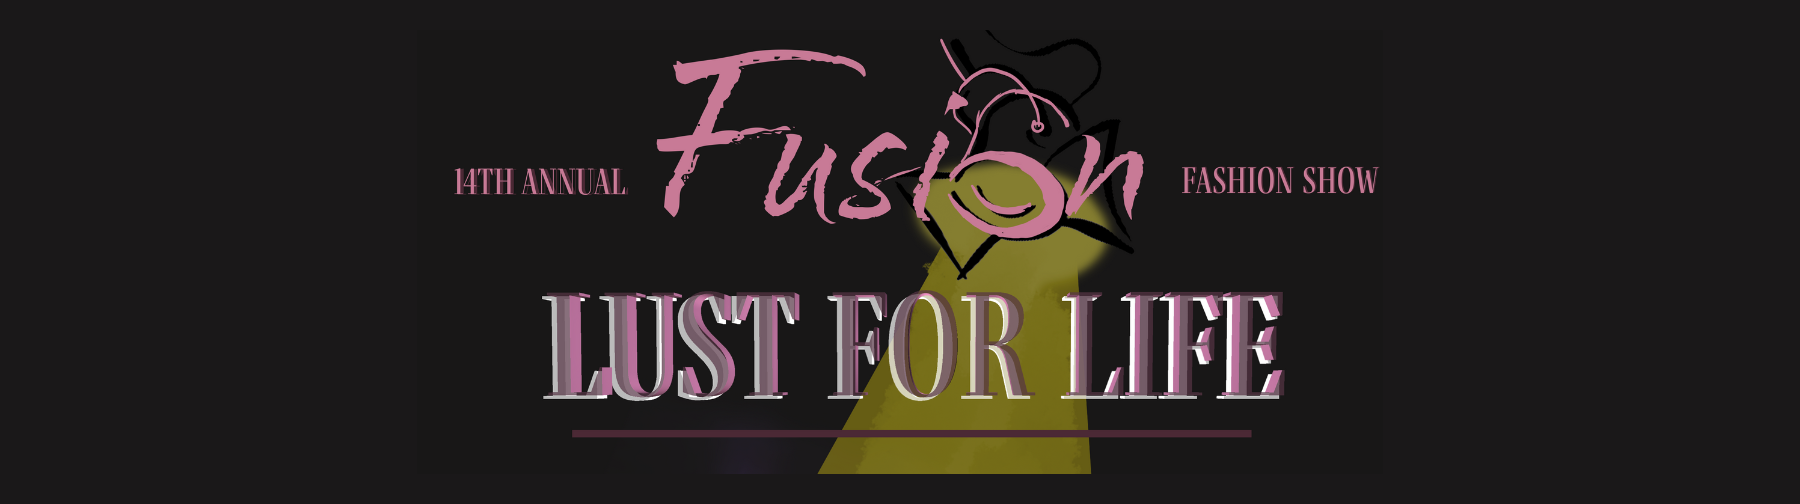 14th Annual Fusion Fashion Show. Lust For Life. 